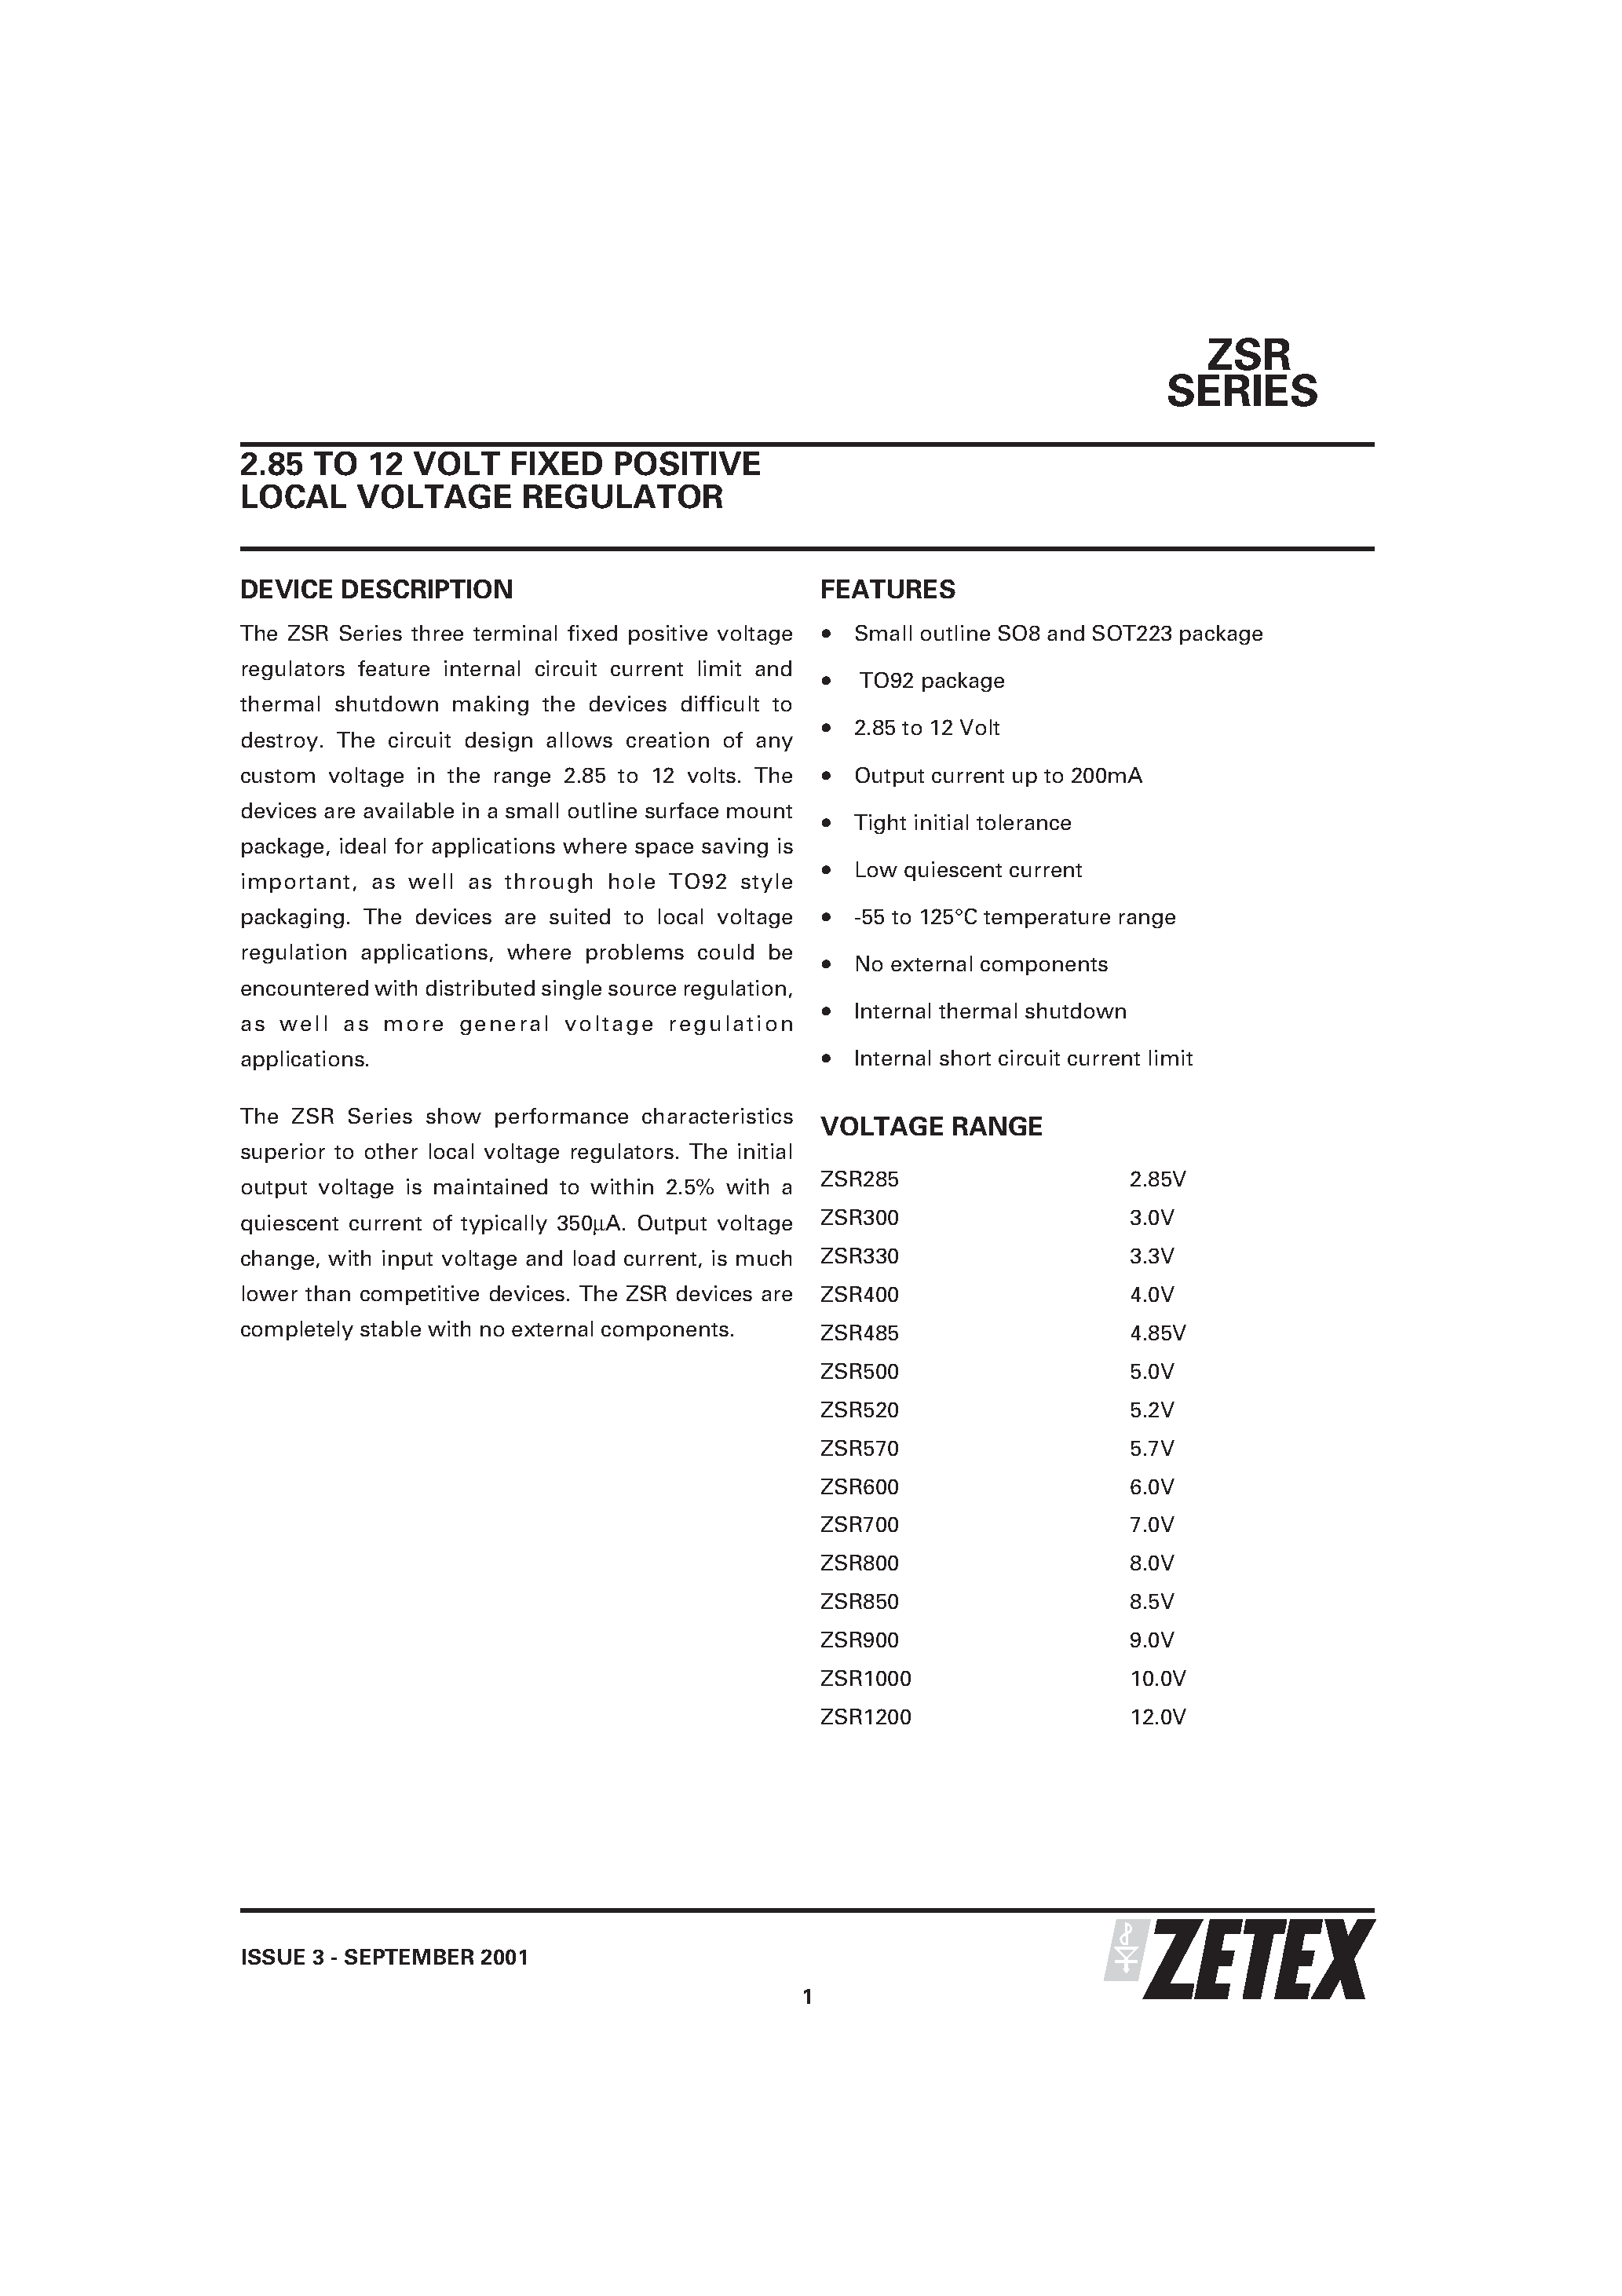 Datasheet ZSR800C - 2.85 TO 12 VOLT FIXED POSITIVE LOCAL VOLTAGE REGULATOR page 1